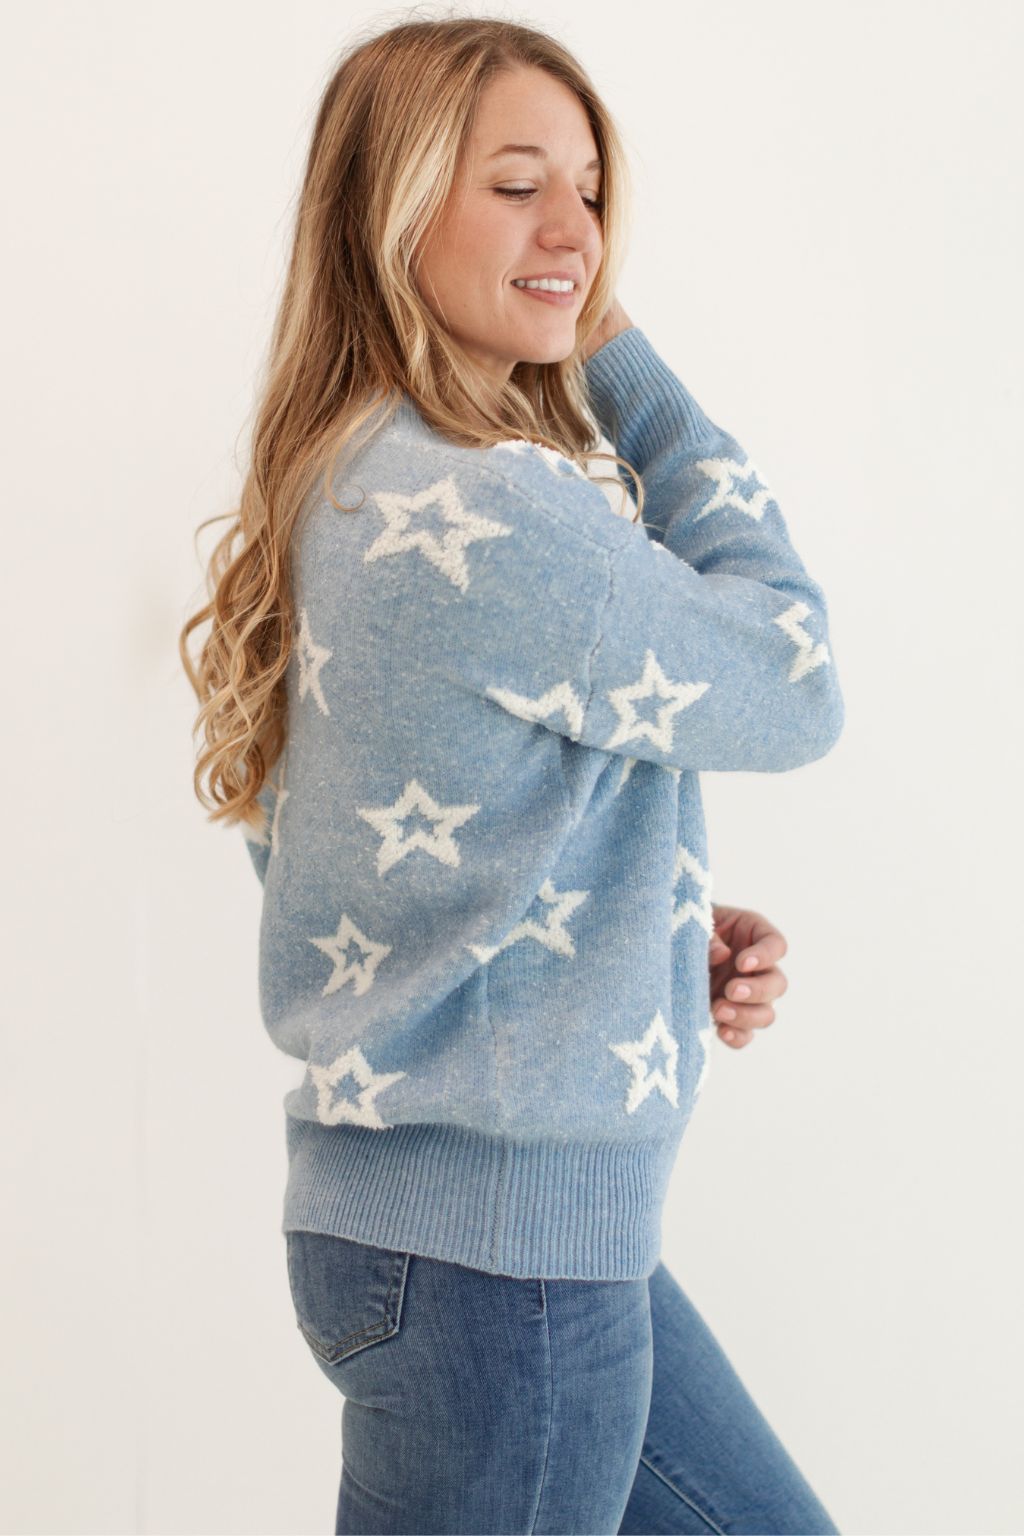 Fuzzy Star Pattern Crewneck Sweater Blue and White